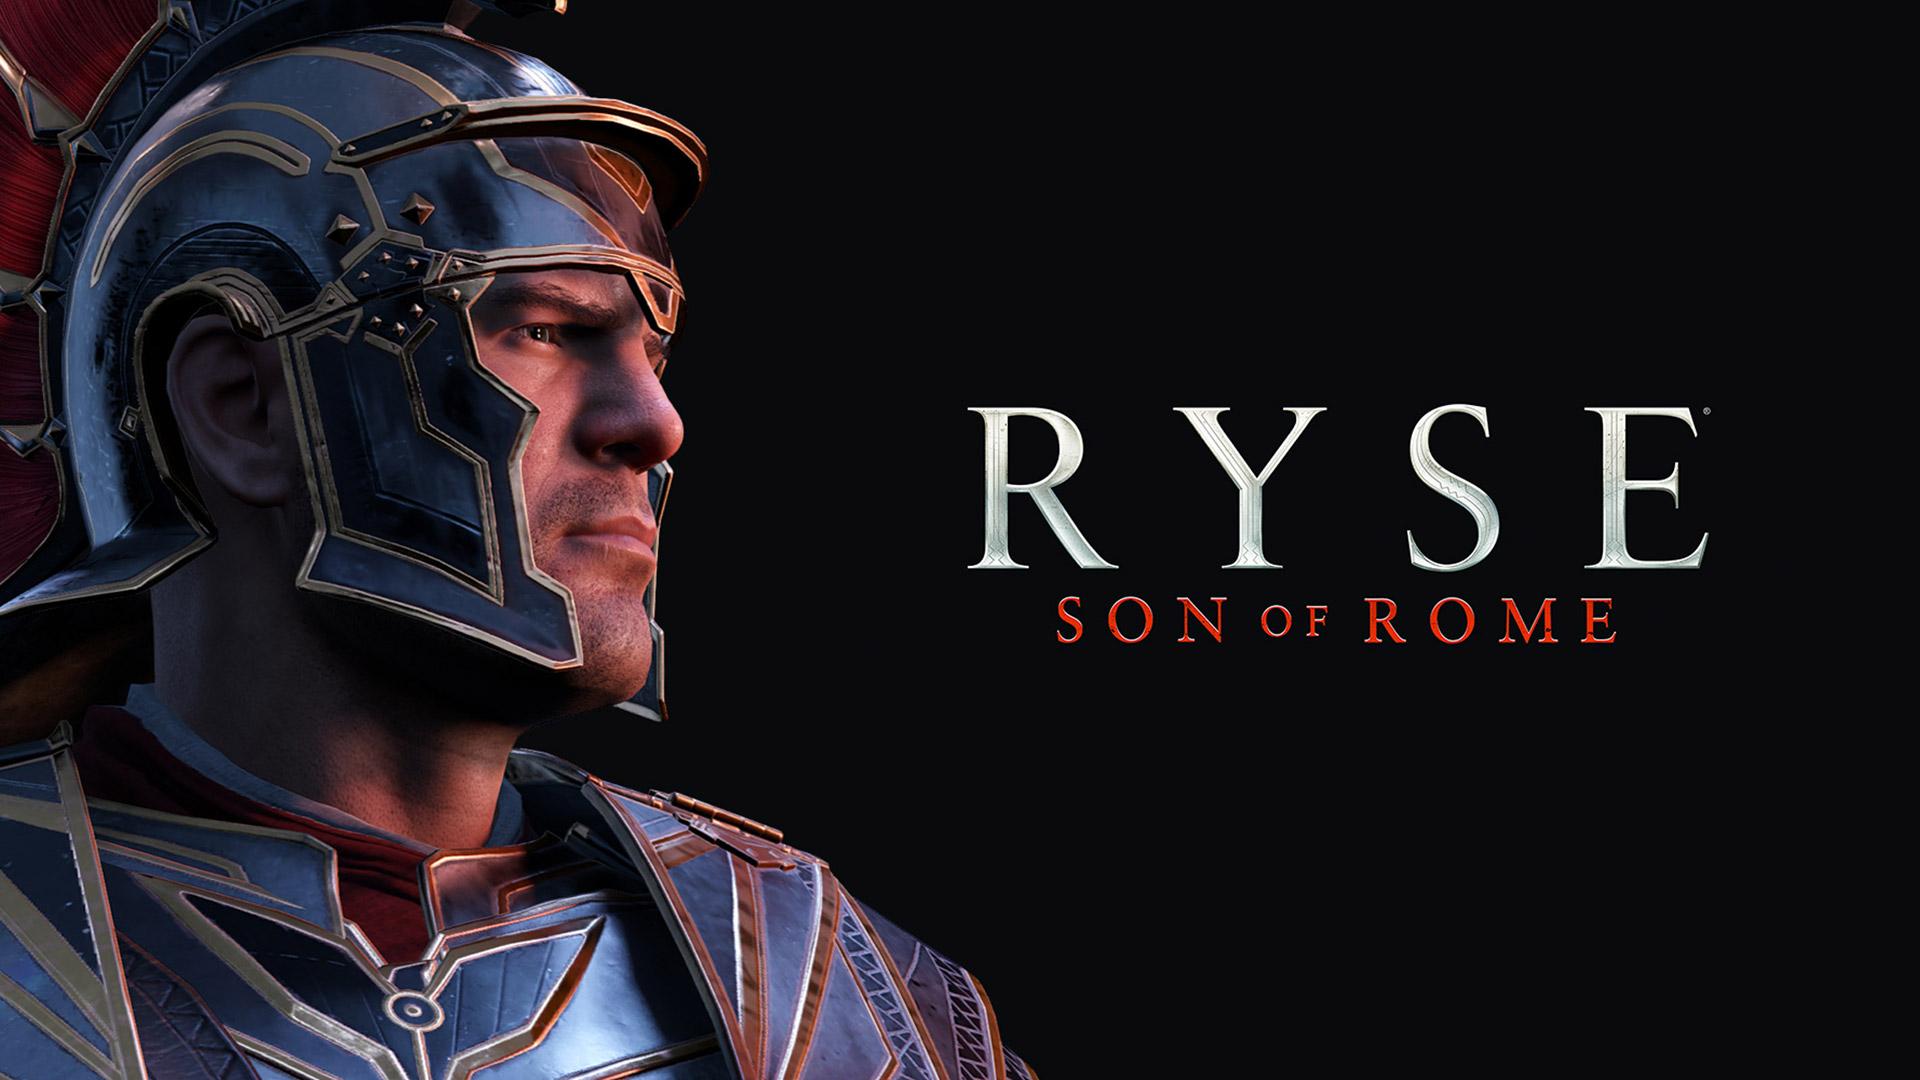 Free Ryse: Son of Rome Wallpaper in 1920x1080